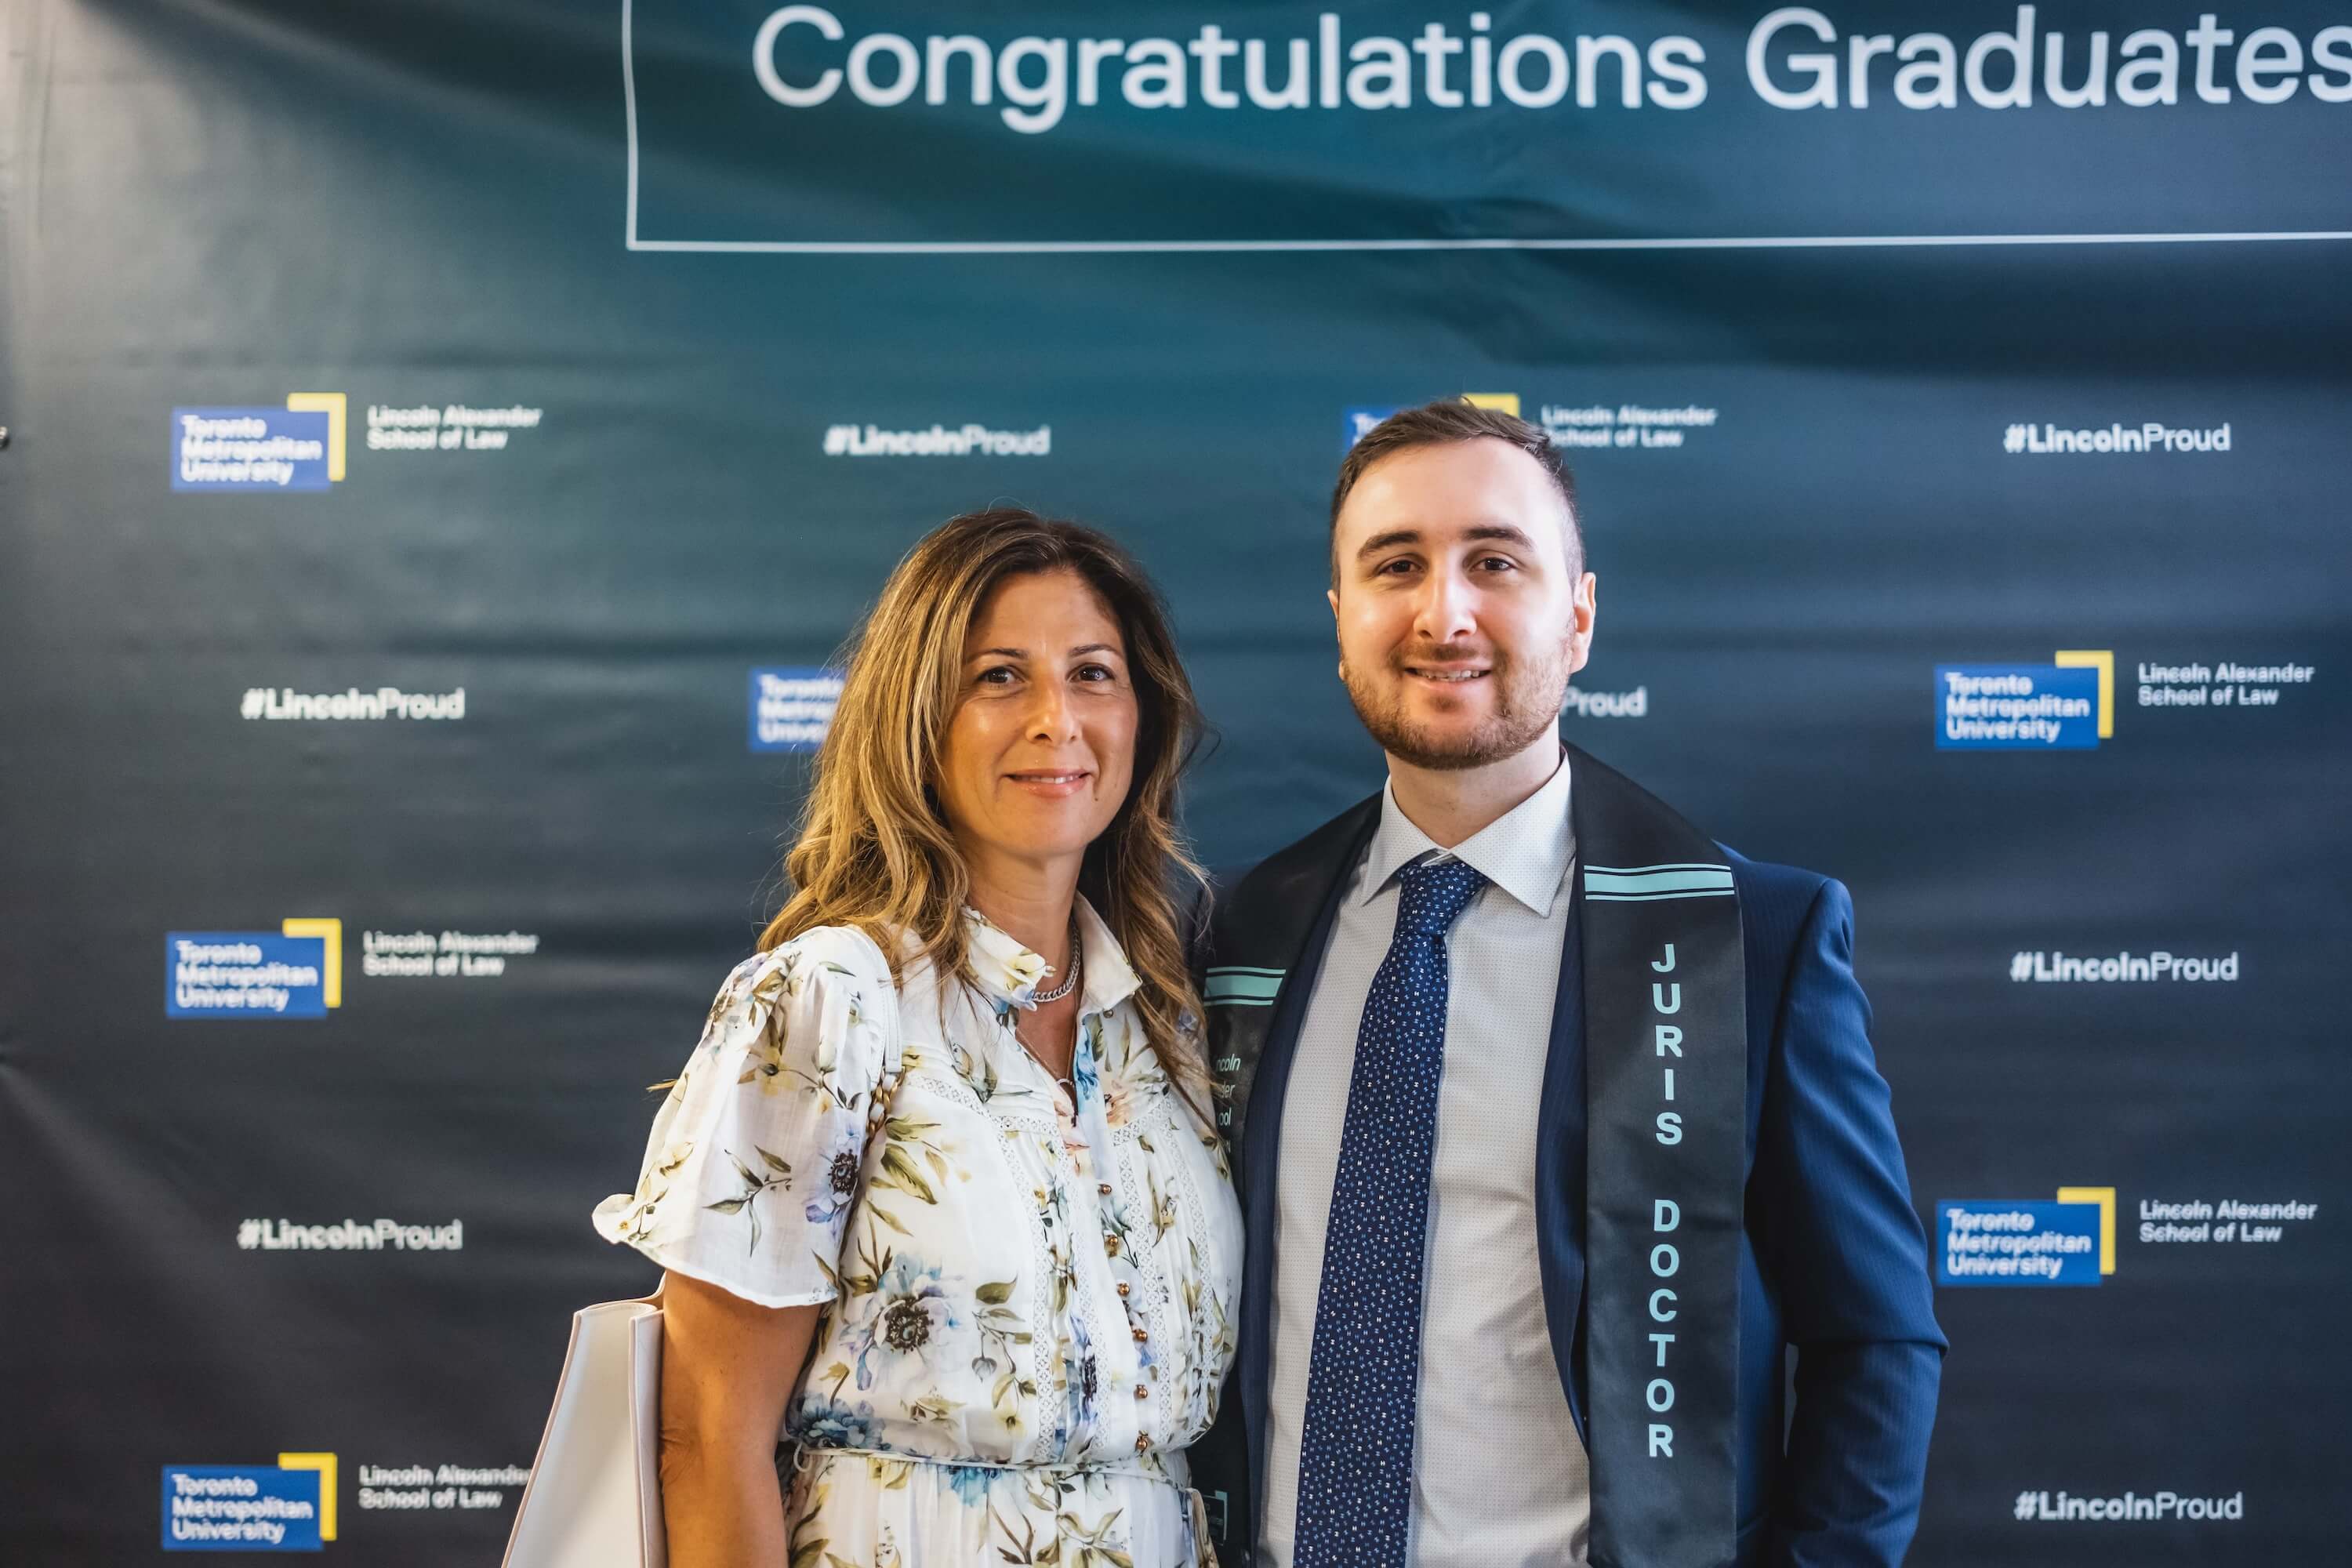 A woman and a young man standing in front of a backdrop that says "Congratulations Graduates!" on it.